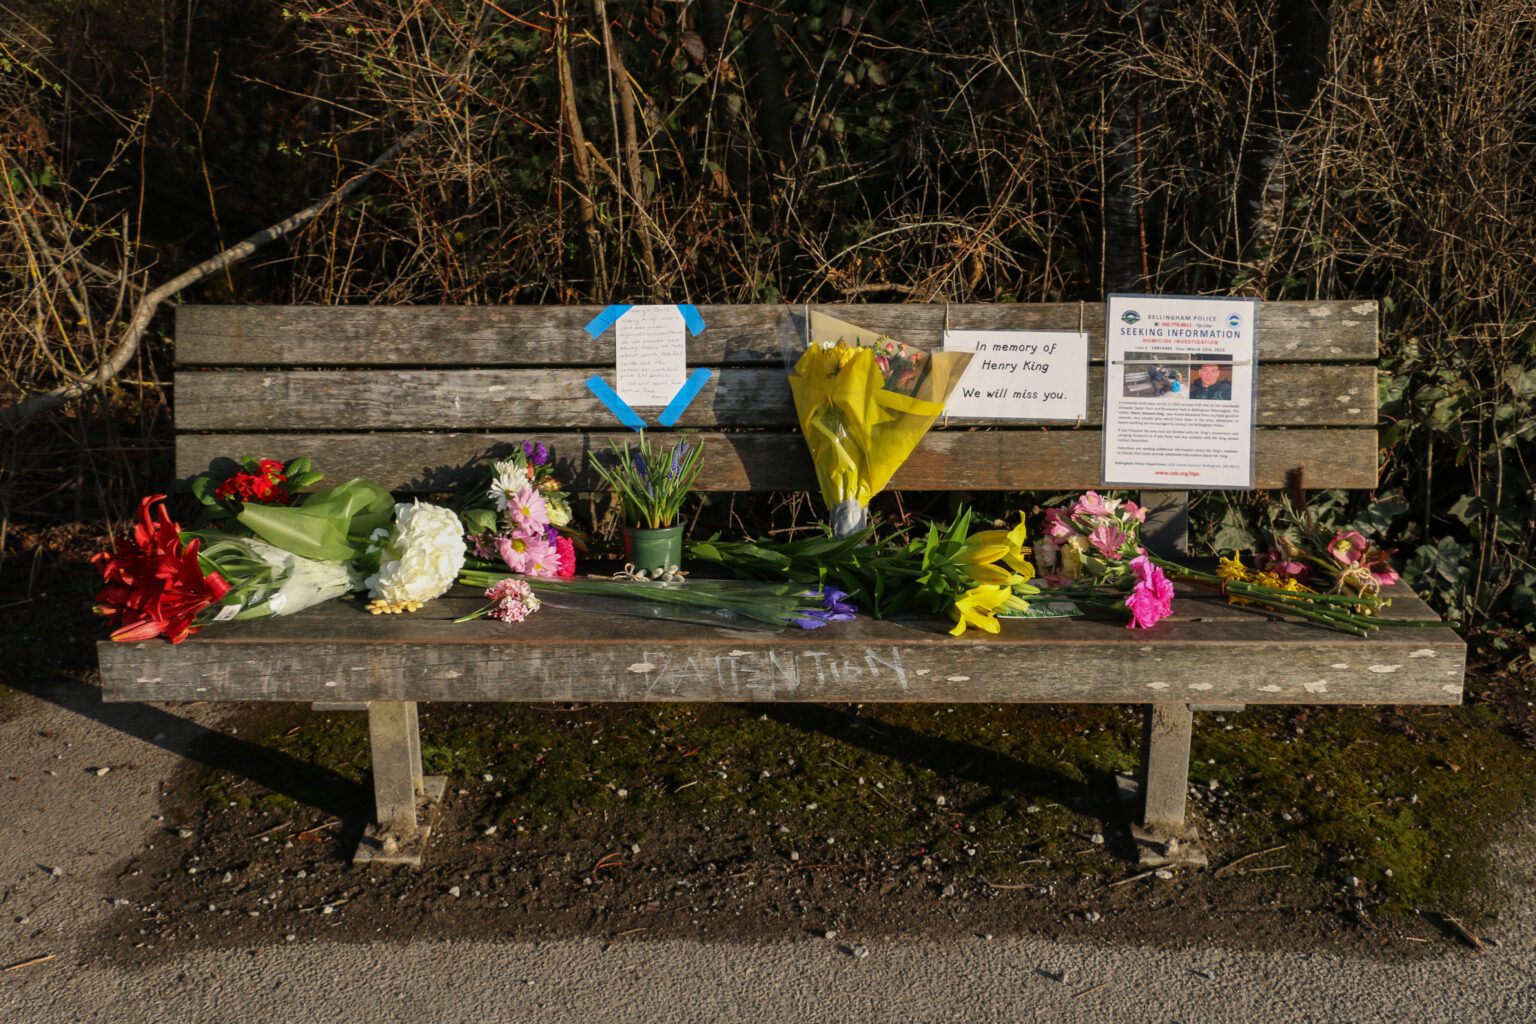 A wooden bench with many flowers left on top. There is an excerpt from the police for any information as well as a sign dedicating the bench in memory of Henry King.